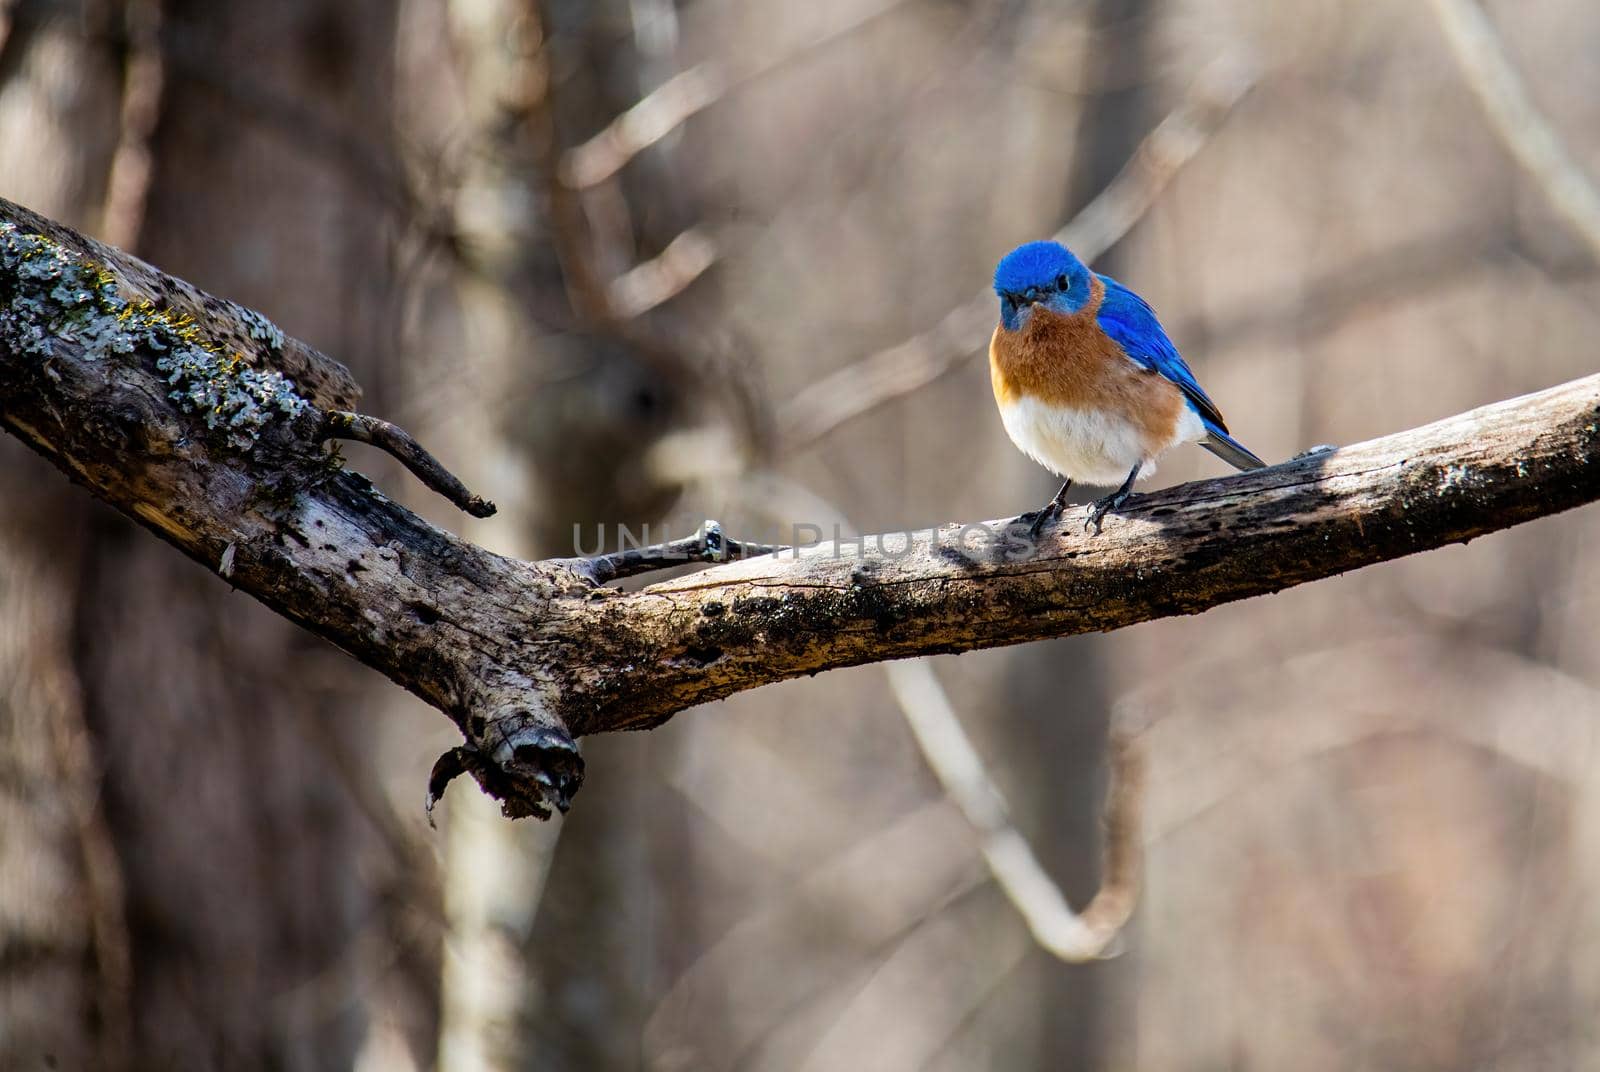 Eastern bluebird with vivid blue feathers perches on an old apple tree limb.